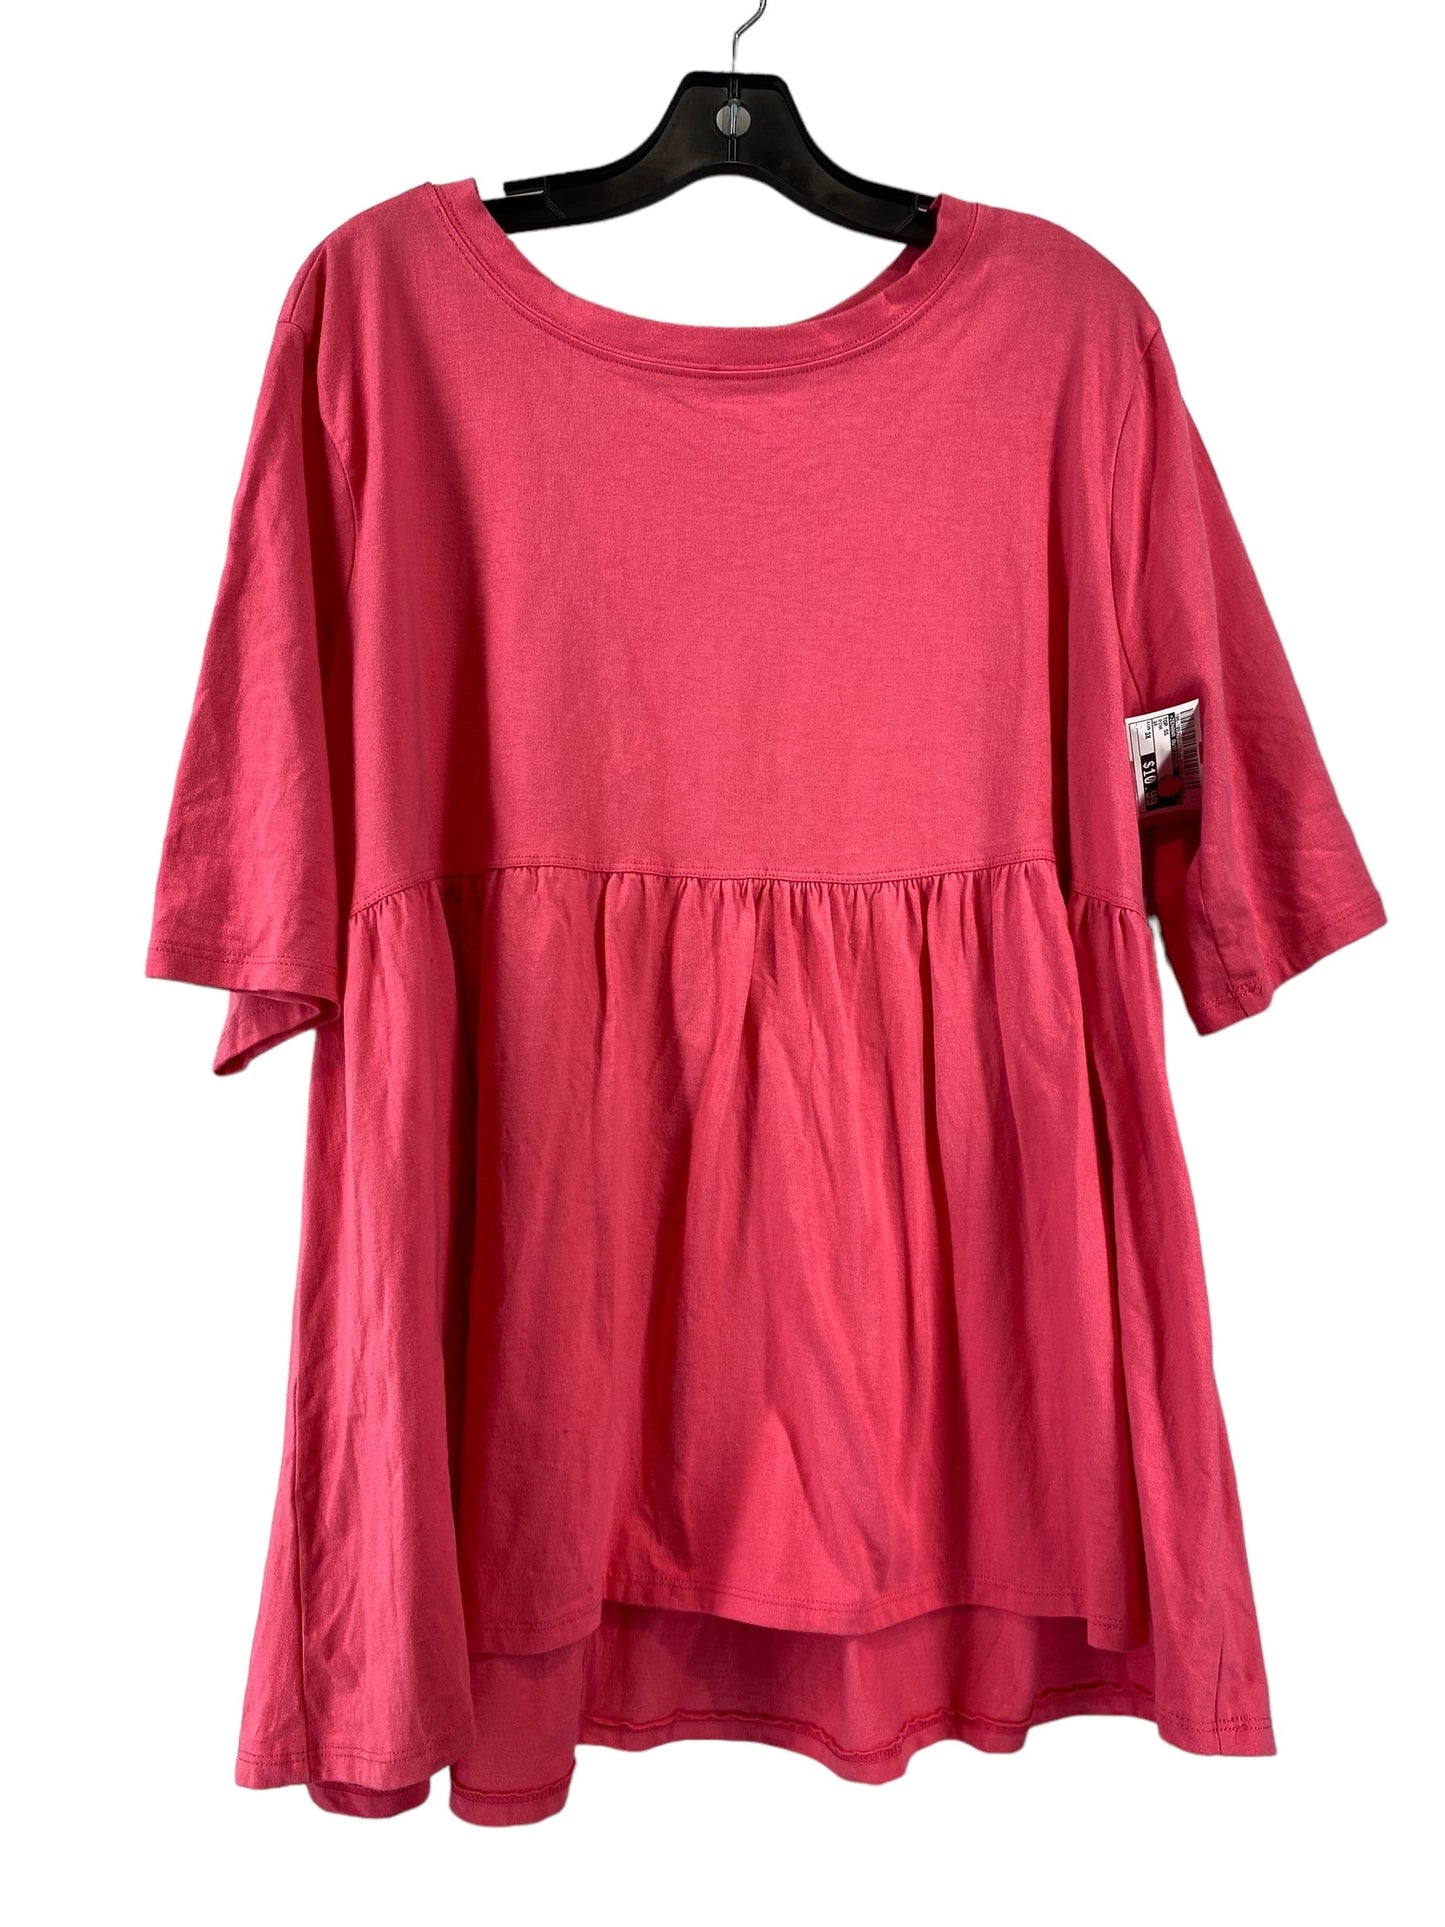 Pink Top Short Sleeve Zenana Outfitters, Size 3x